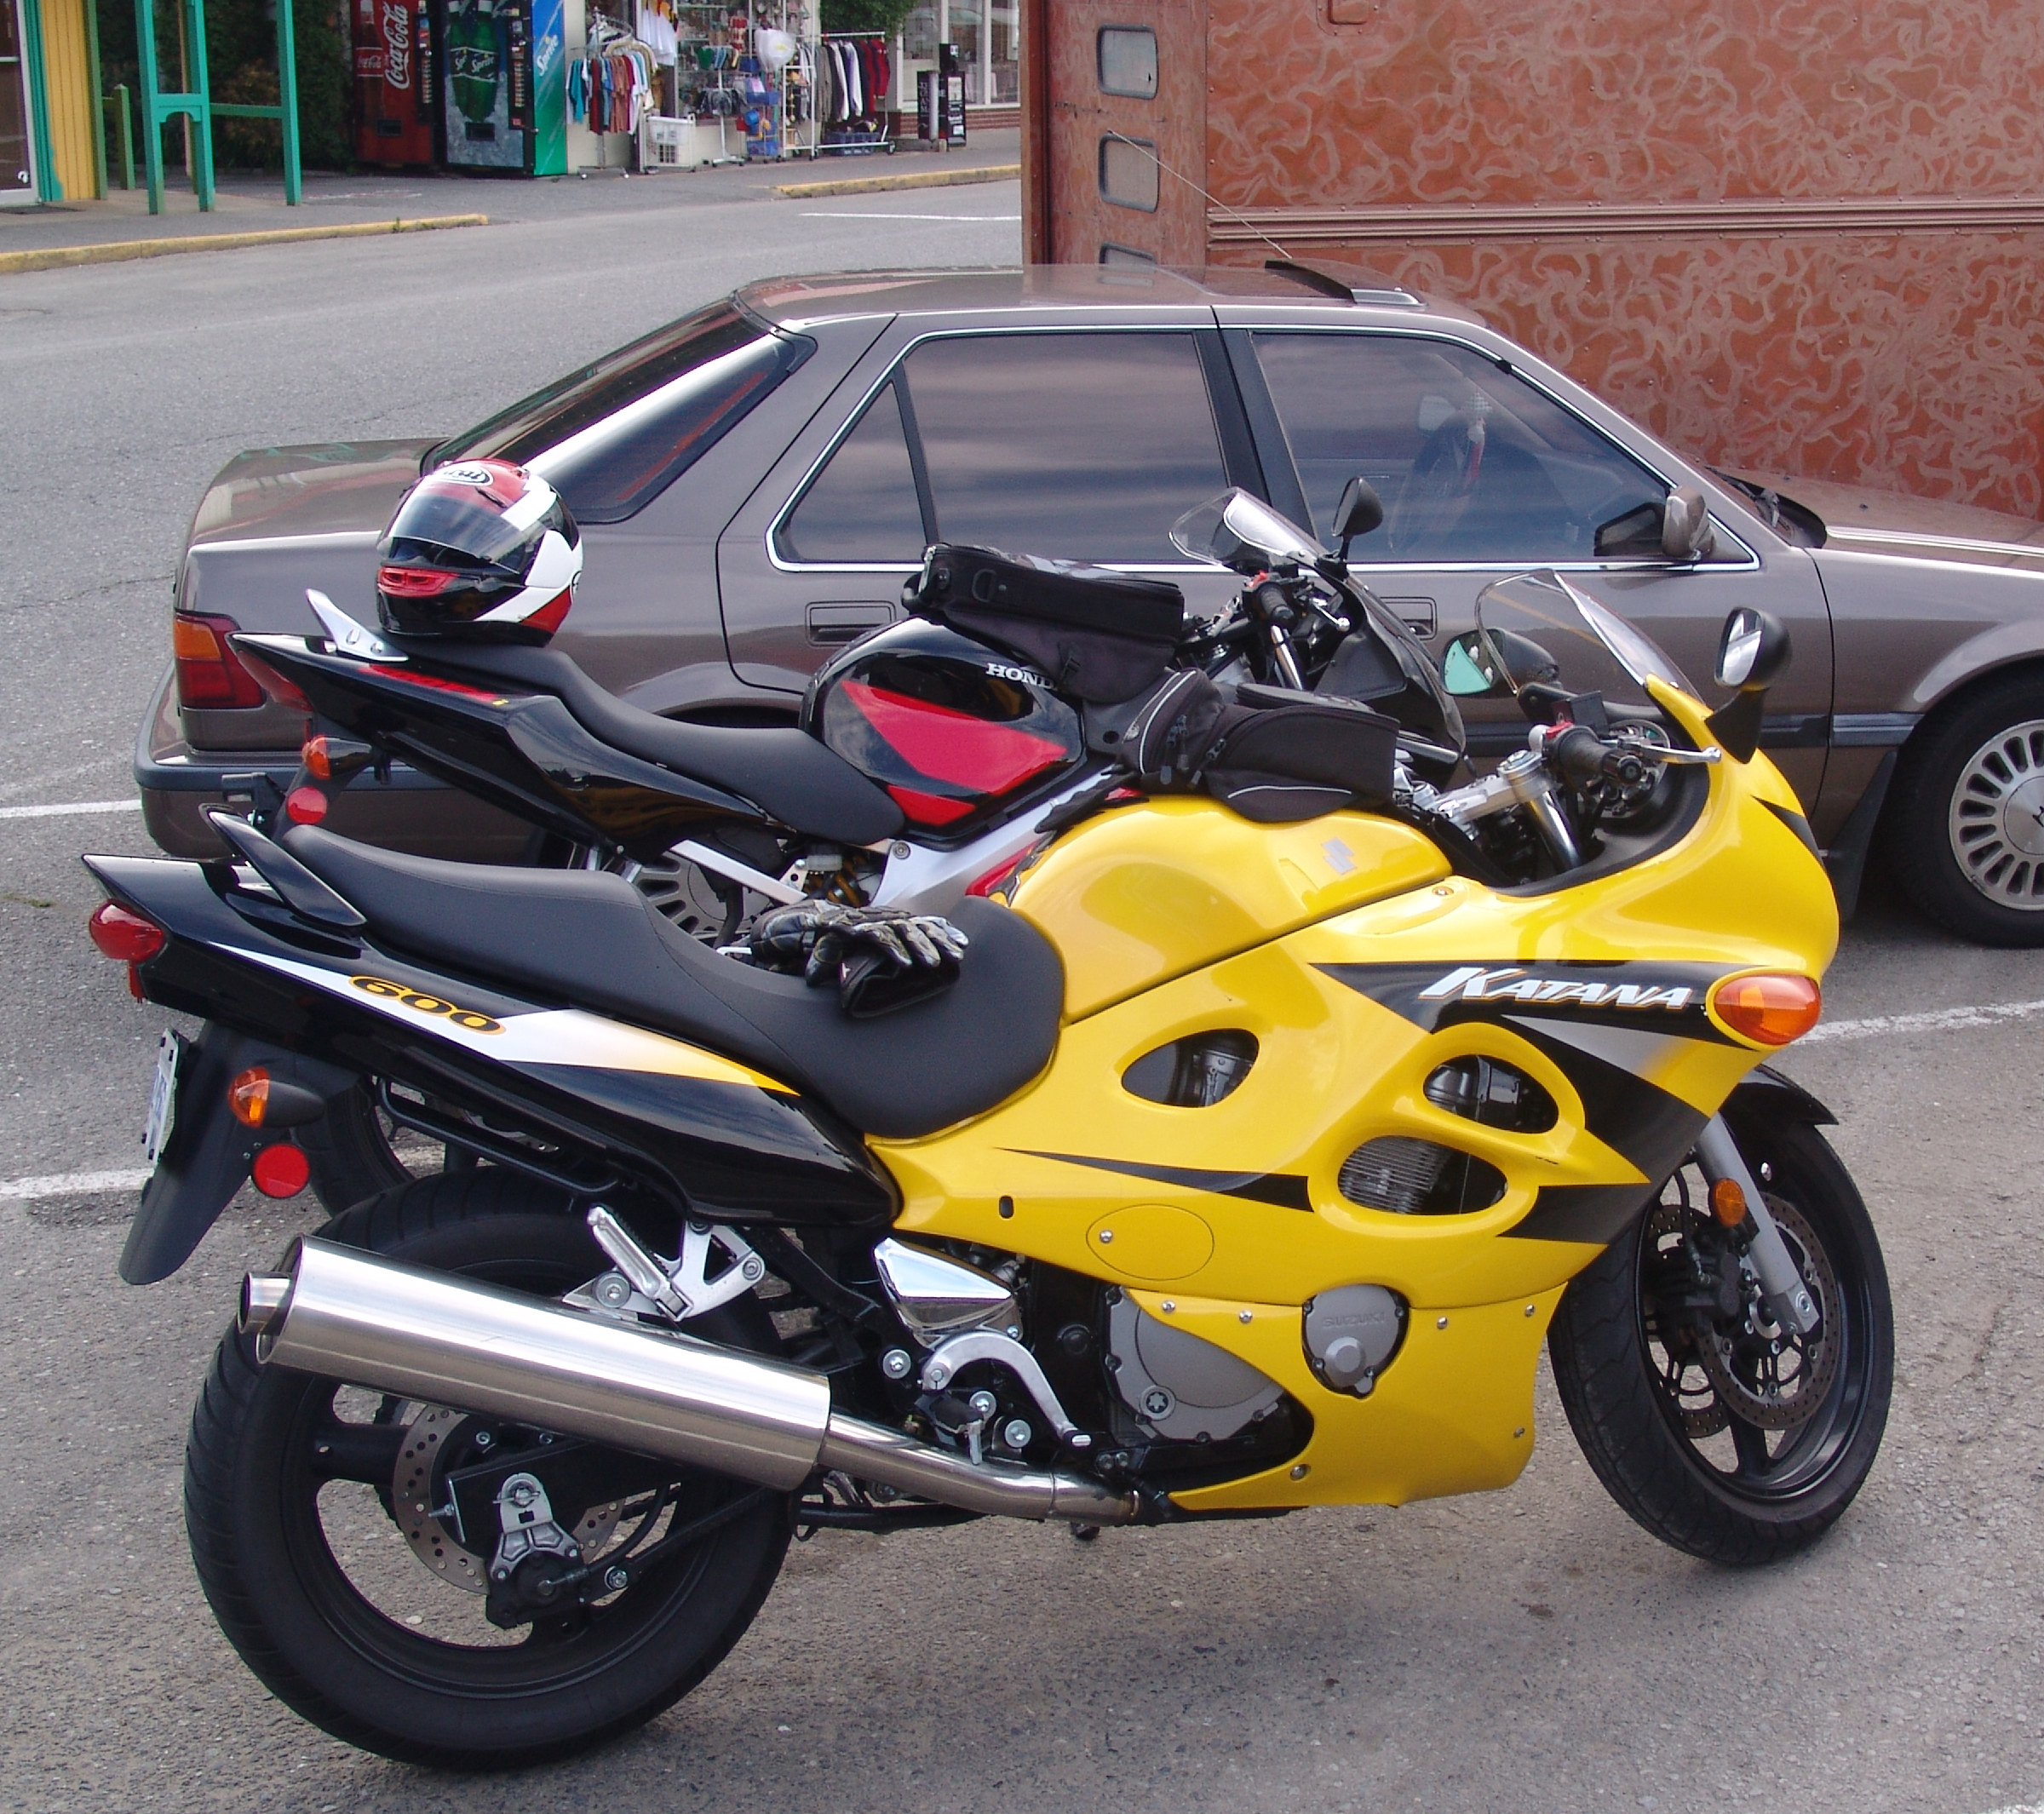 Review of Suzuki GSX 600 F 1997 pictures, live photos